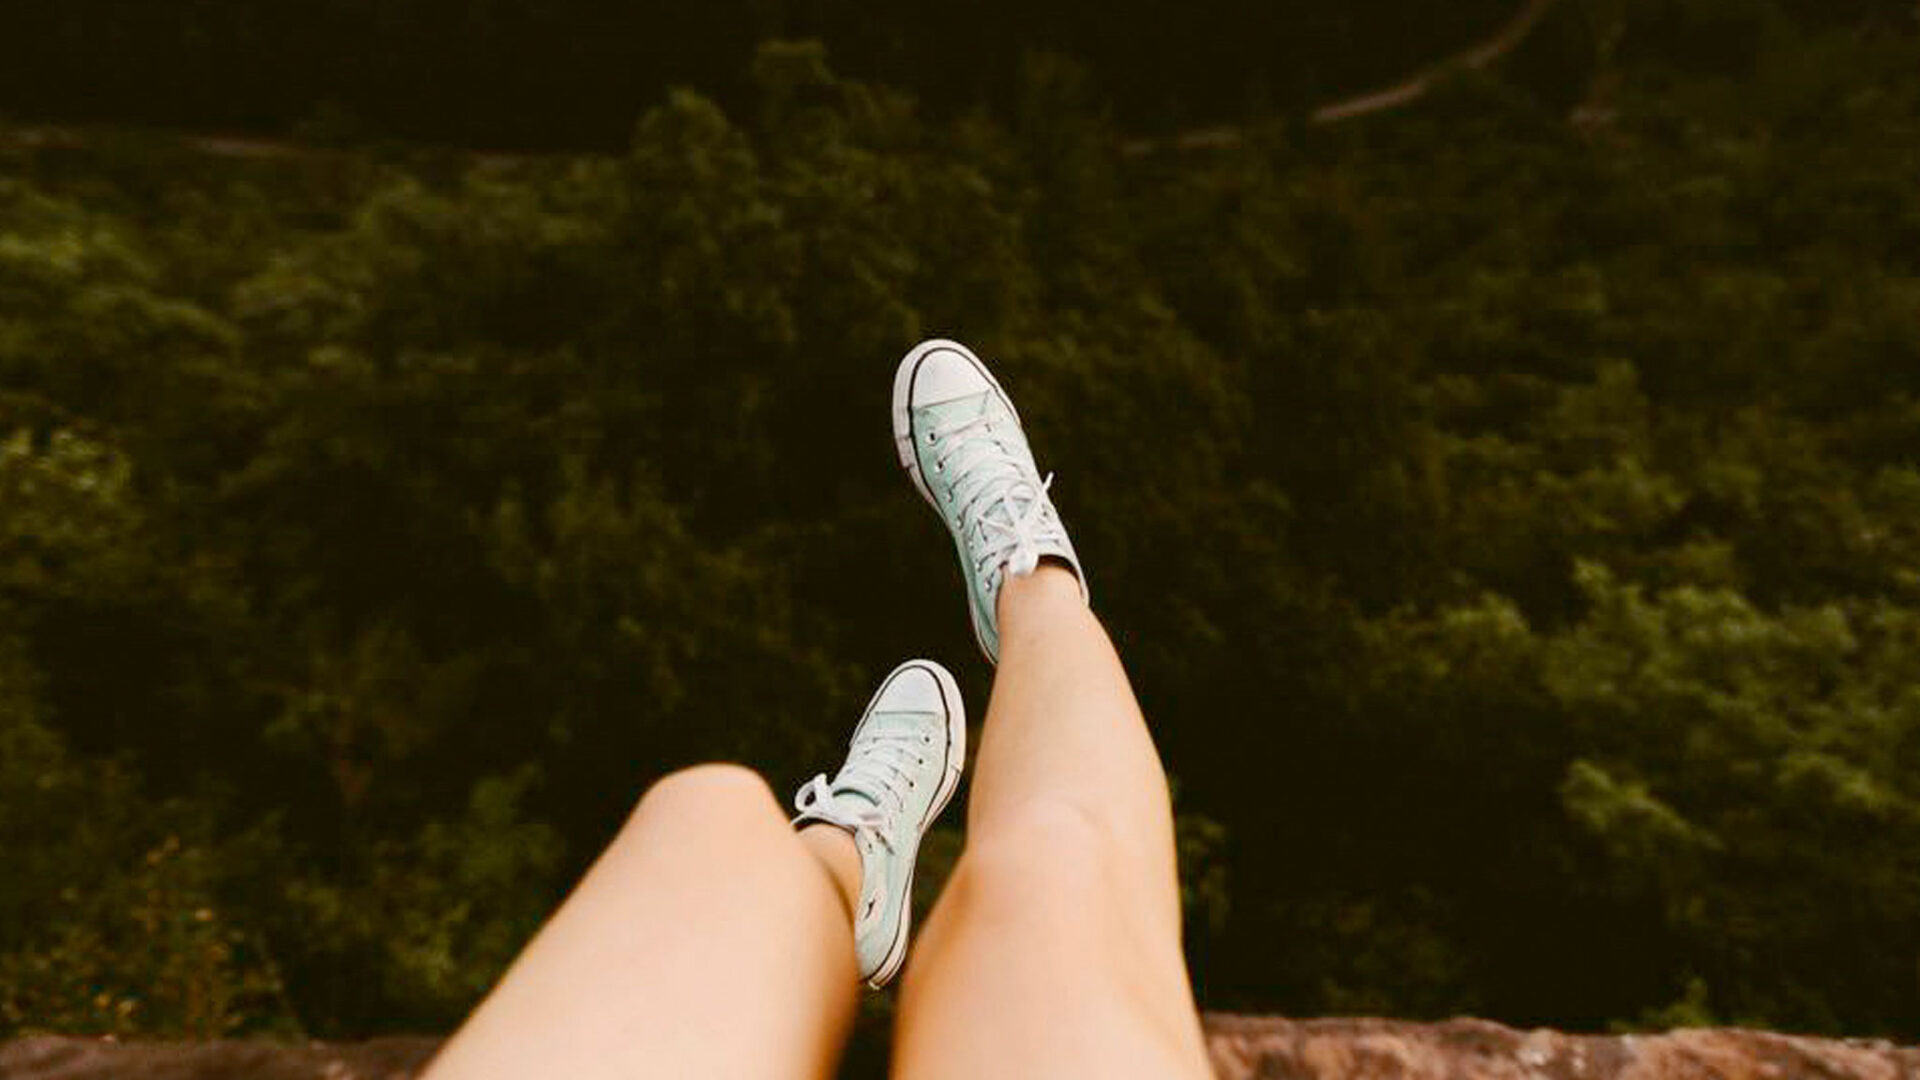 Girls legs and feet dangling over edge of a cliff